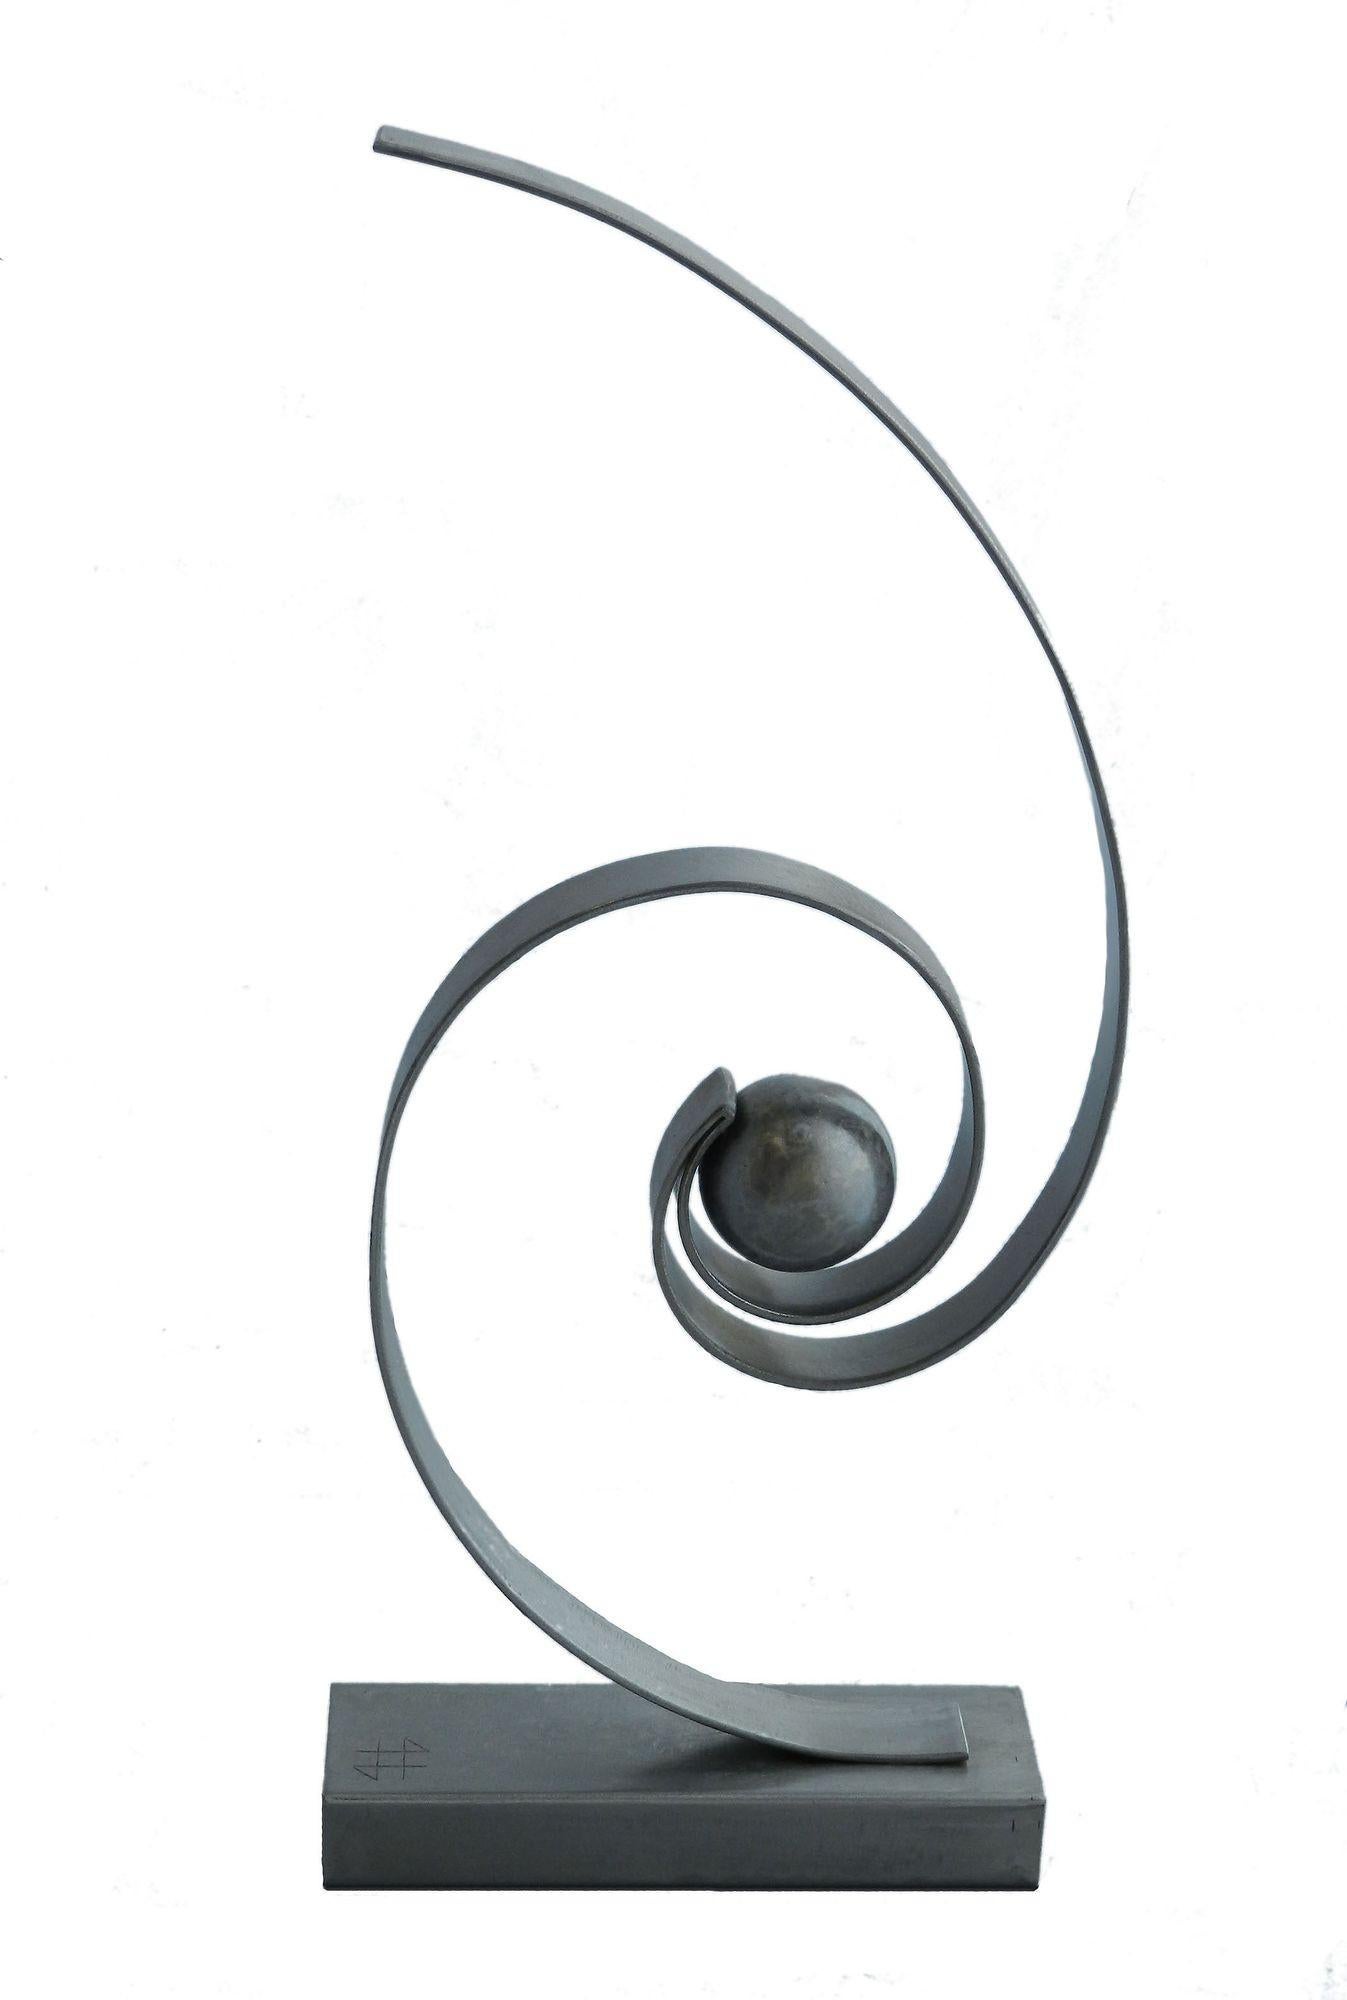 Unknown Abstract Sculpture - Metal Sculpture Spirale by Jean-Luc Cartier c2020